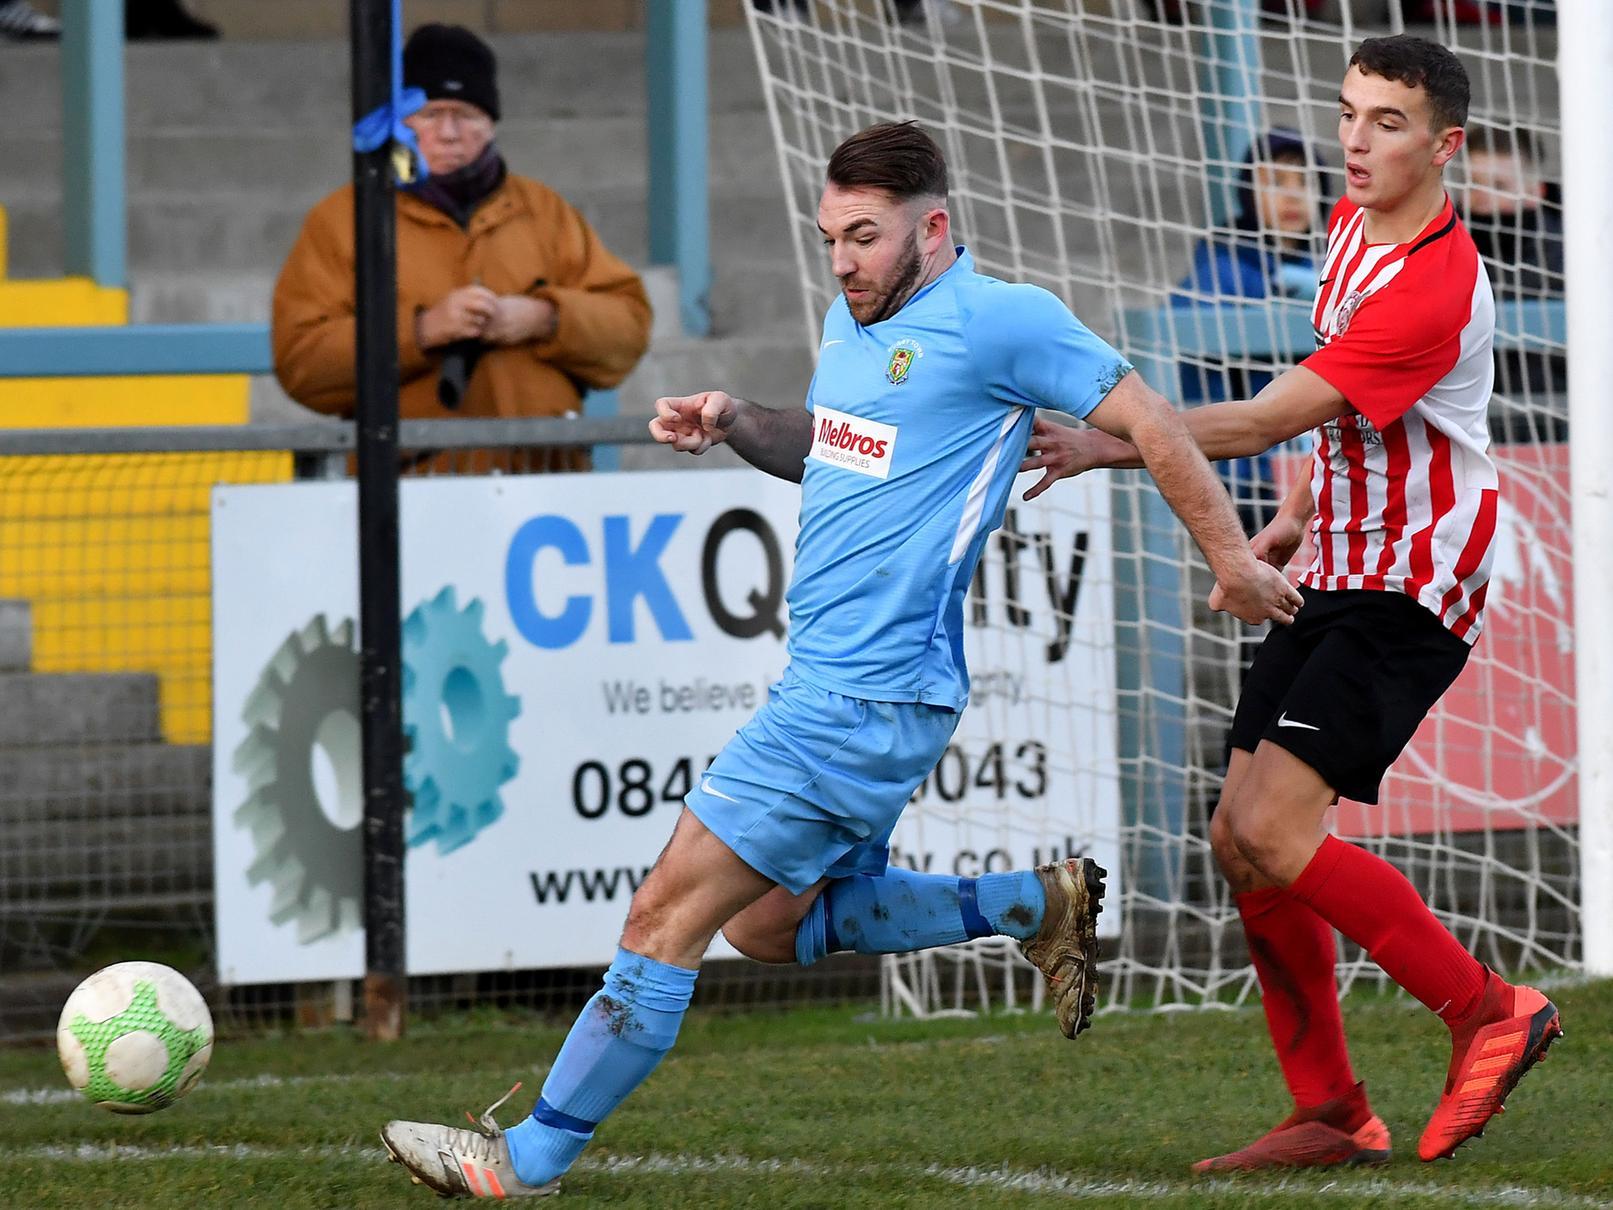 Ryan Seal collects the ball in the box against Anstey Nomads